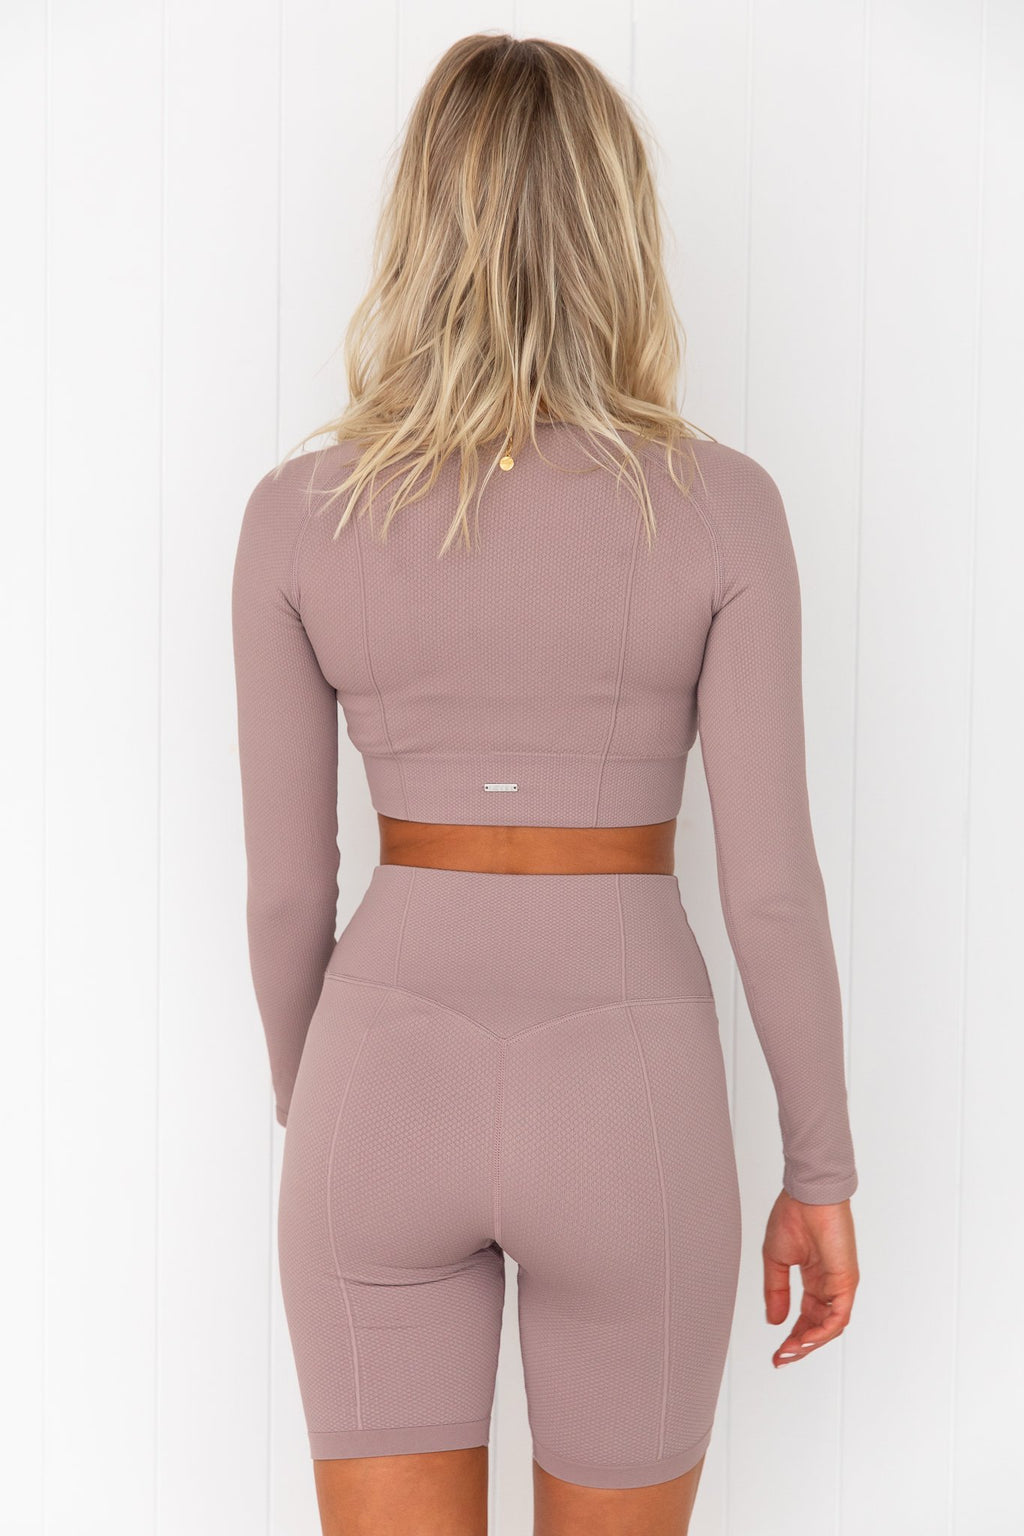 Dusty Violet Luxe Seamless Crop Long Sleeve